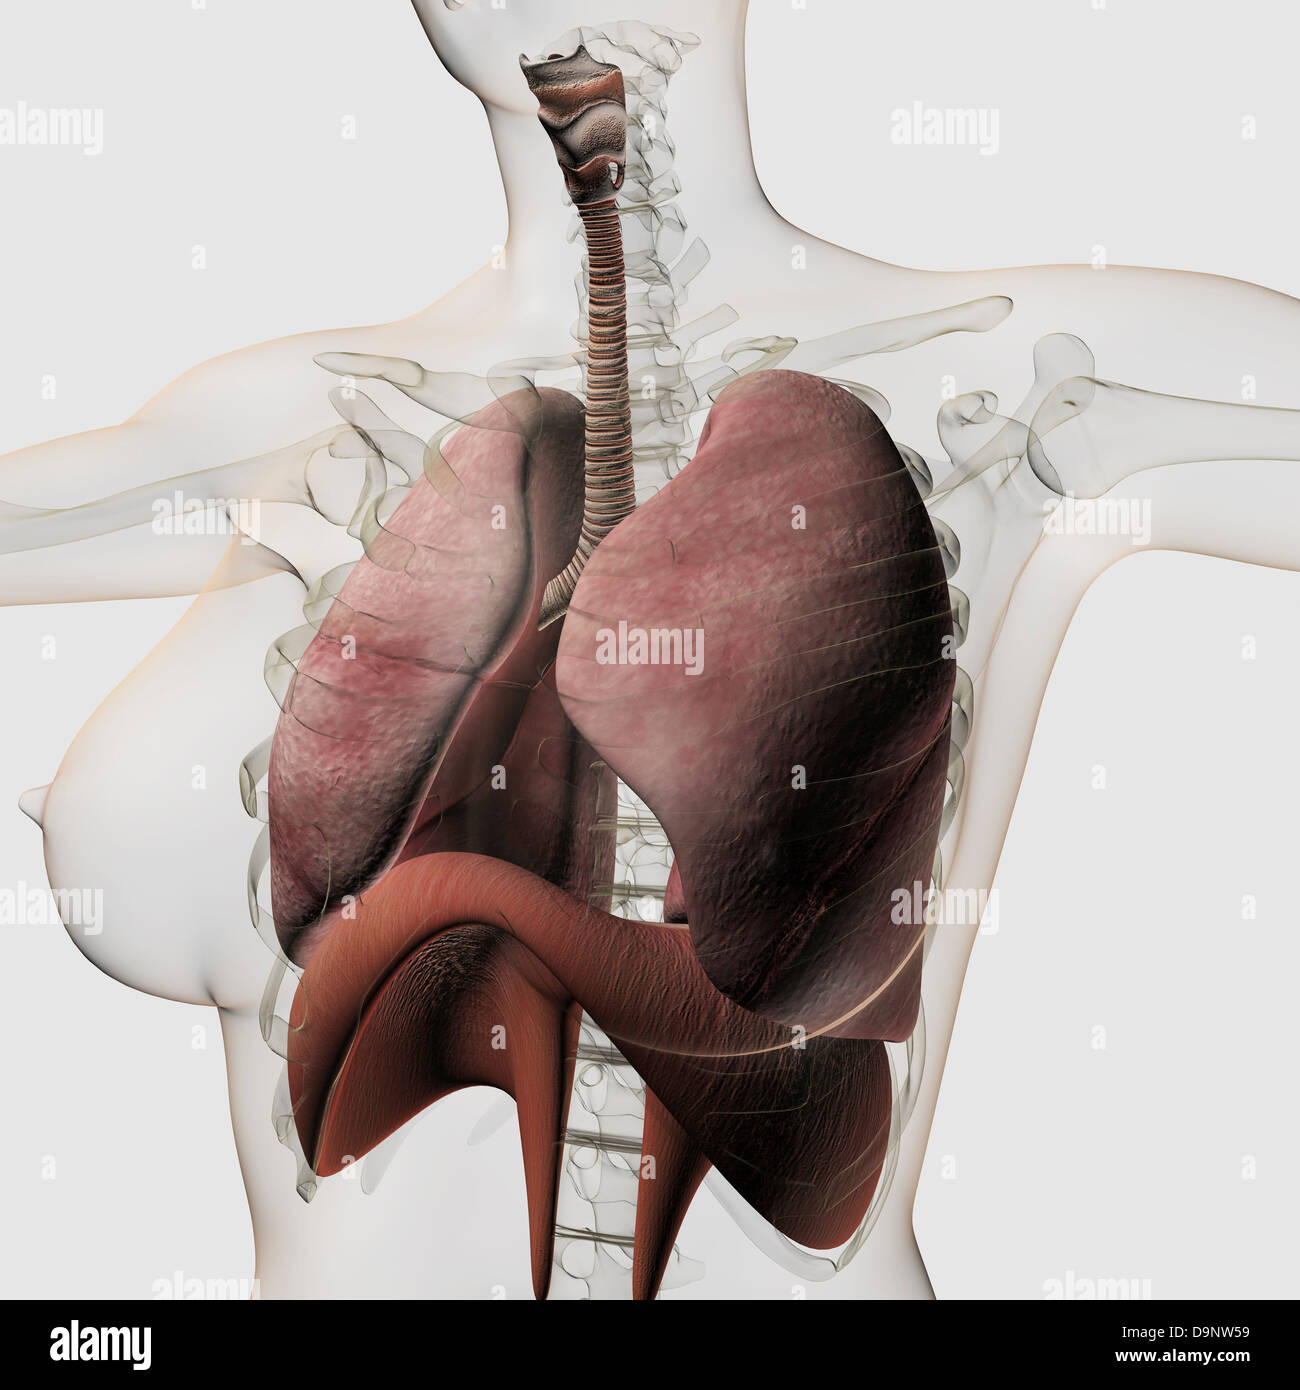 Three dimensional view of the female respiratory system, close-up. Stock Photo